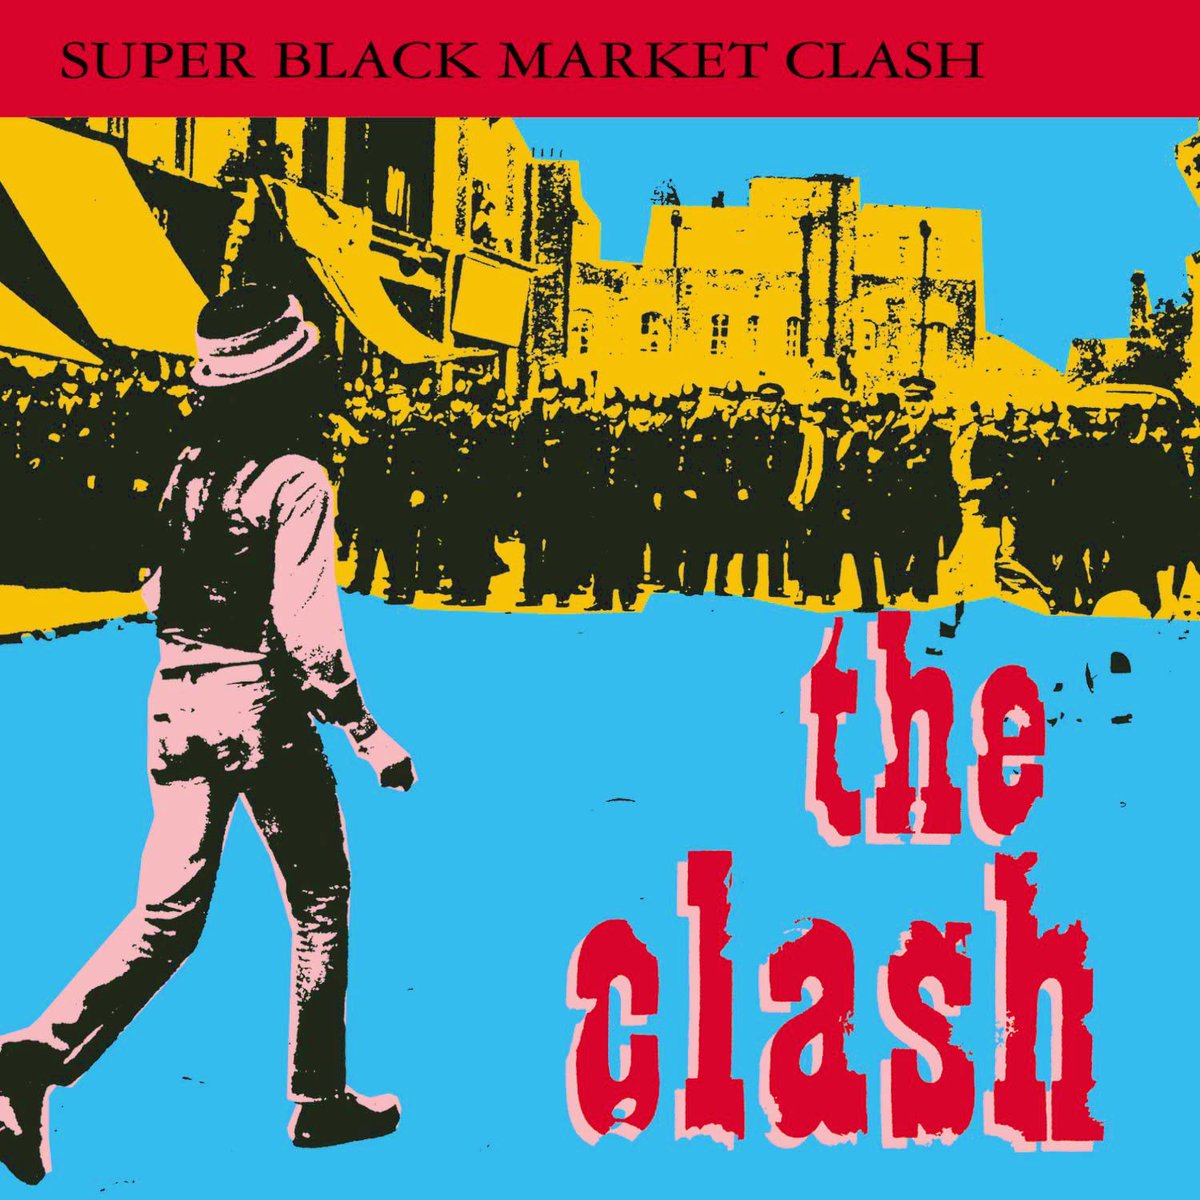 On this day in 1993, #TheClash compilation “Super Black Market Clash” was released containing B-sides and rare tracks not available on the group's regular studio albums.